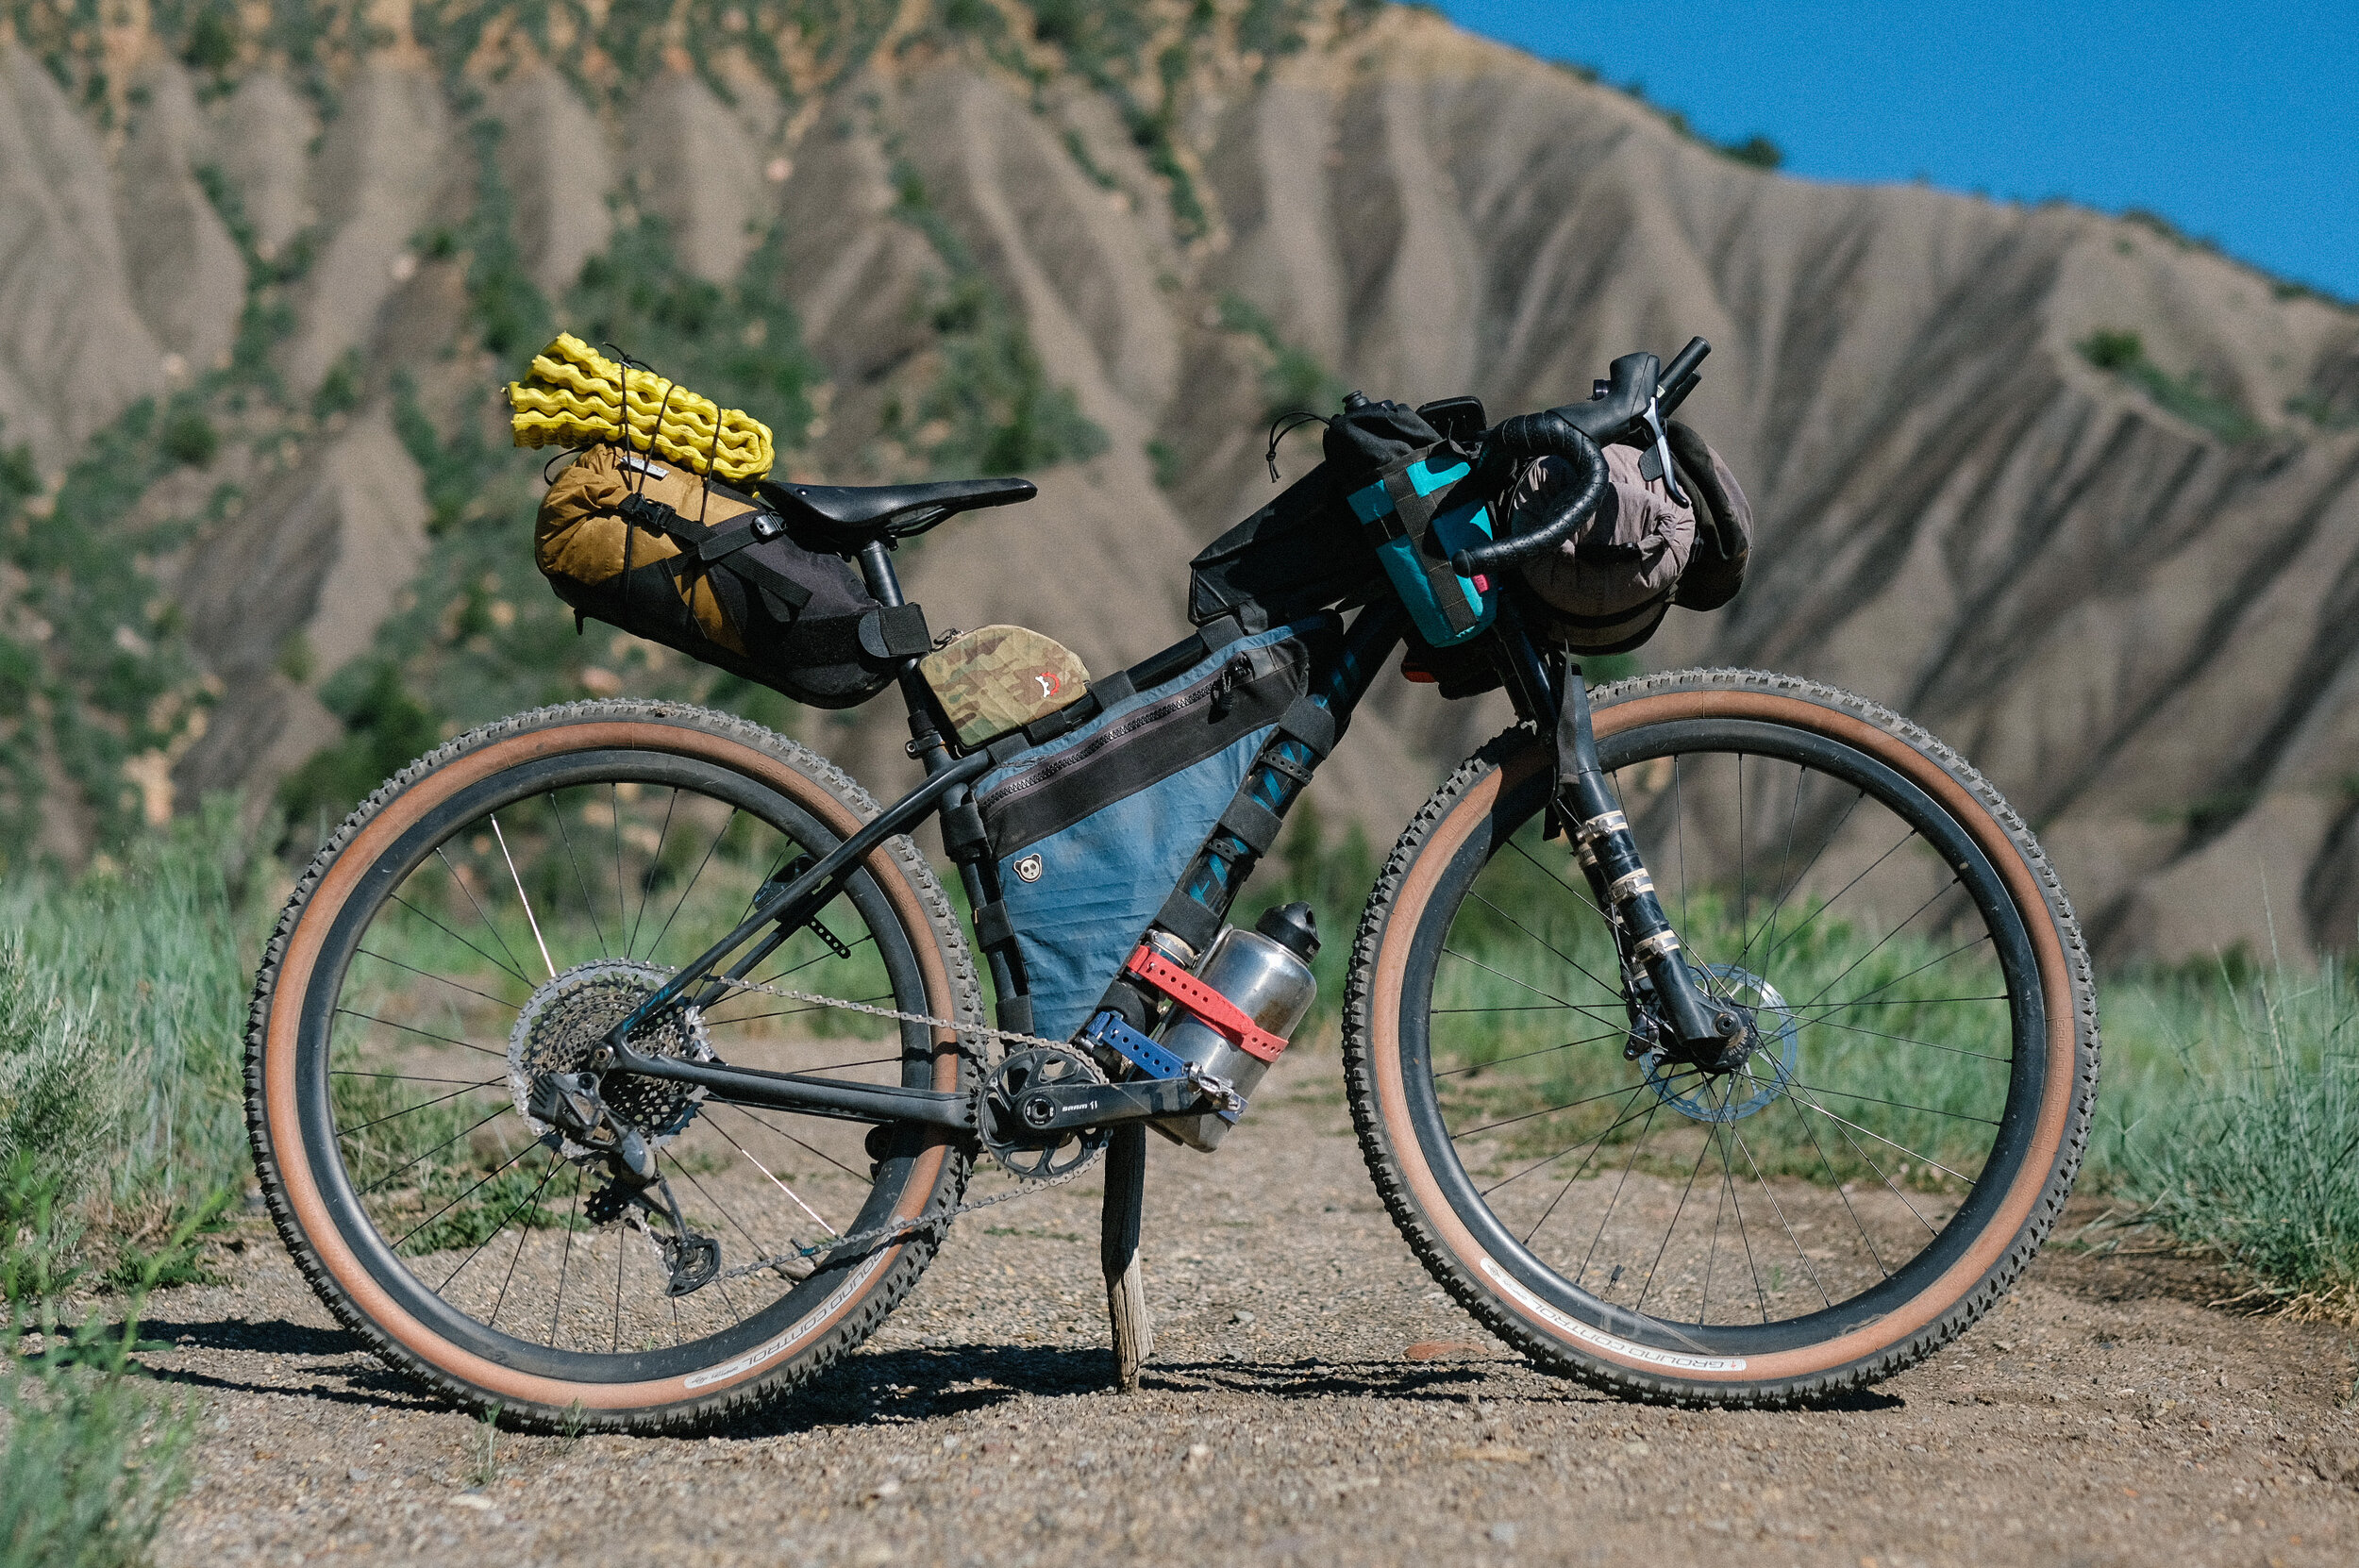 This is my bike for the Tour Divide 2021